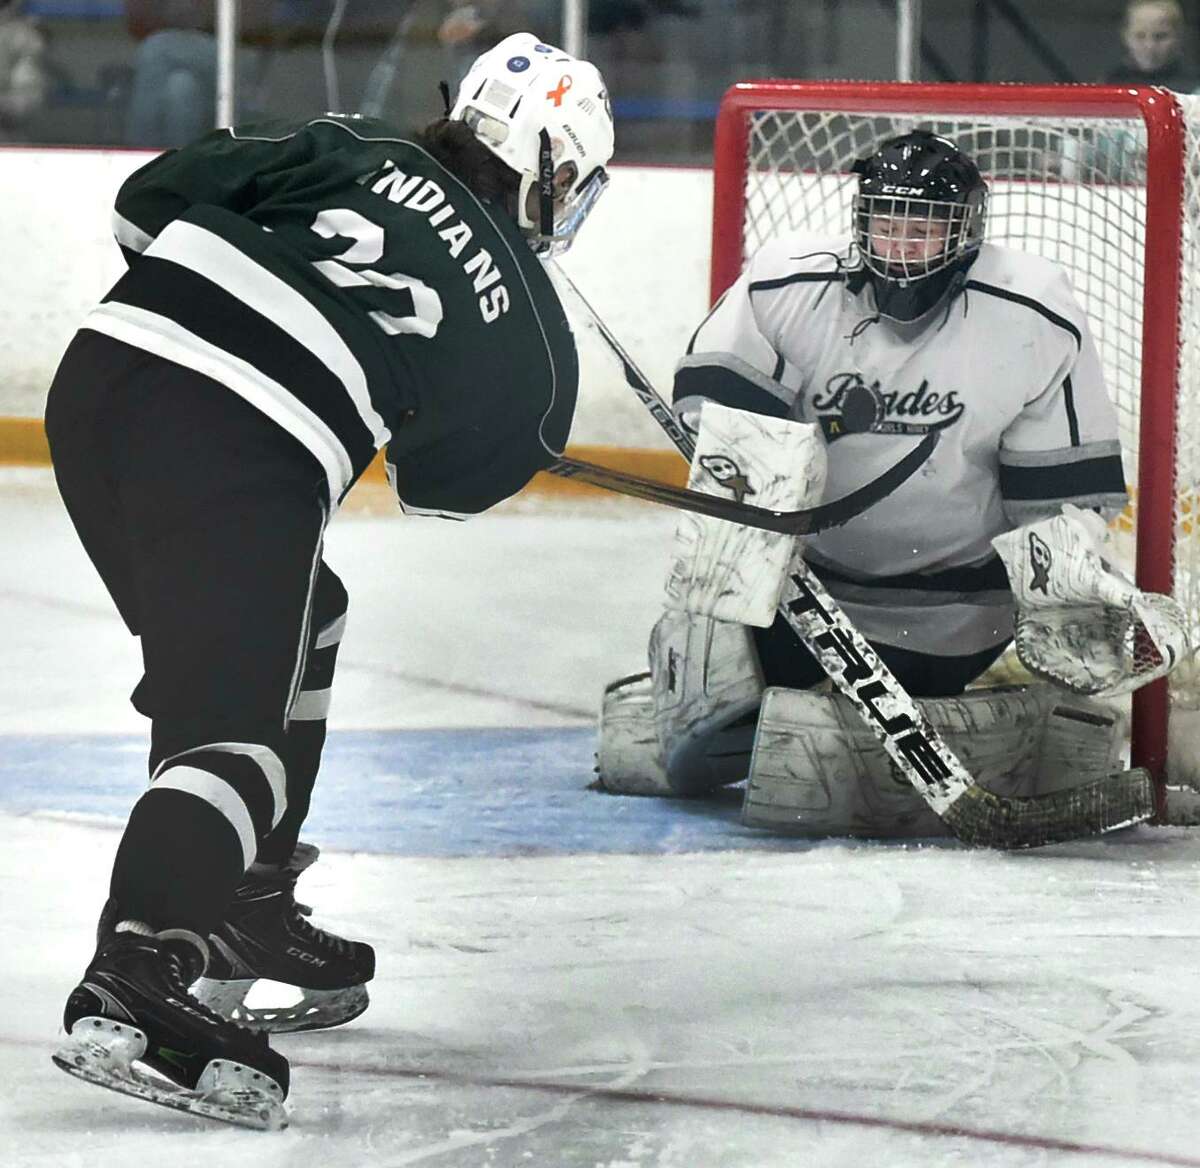 West Haven, Connecticut - February 29, 2020: Maddie Epke of Guilford takes a shot on goal, left, against goalie Jude Krukar of Amity/New Haven/ Cheshire Blades, right, goal during the second period of the SCC 2020 Girls Ice Hockey Championship Saturday afternoon at Bennett Rink in West Haven.